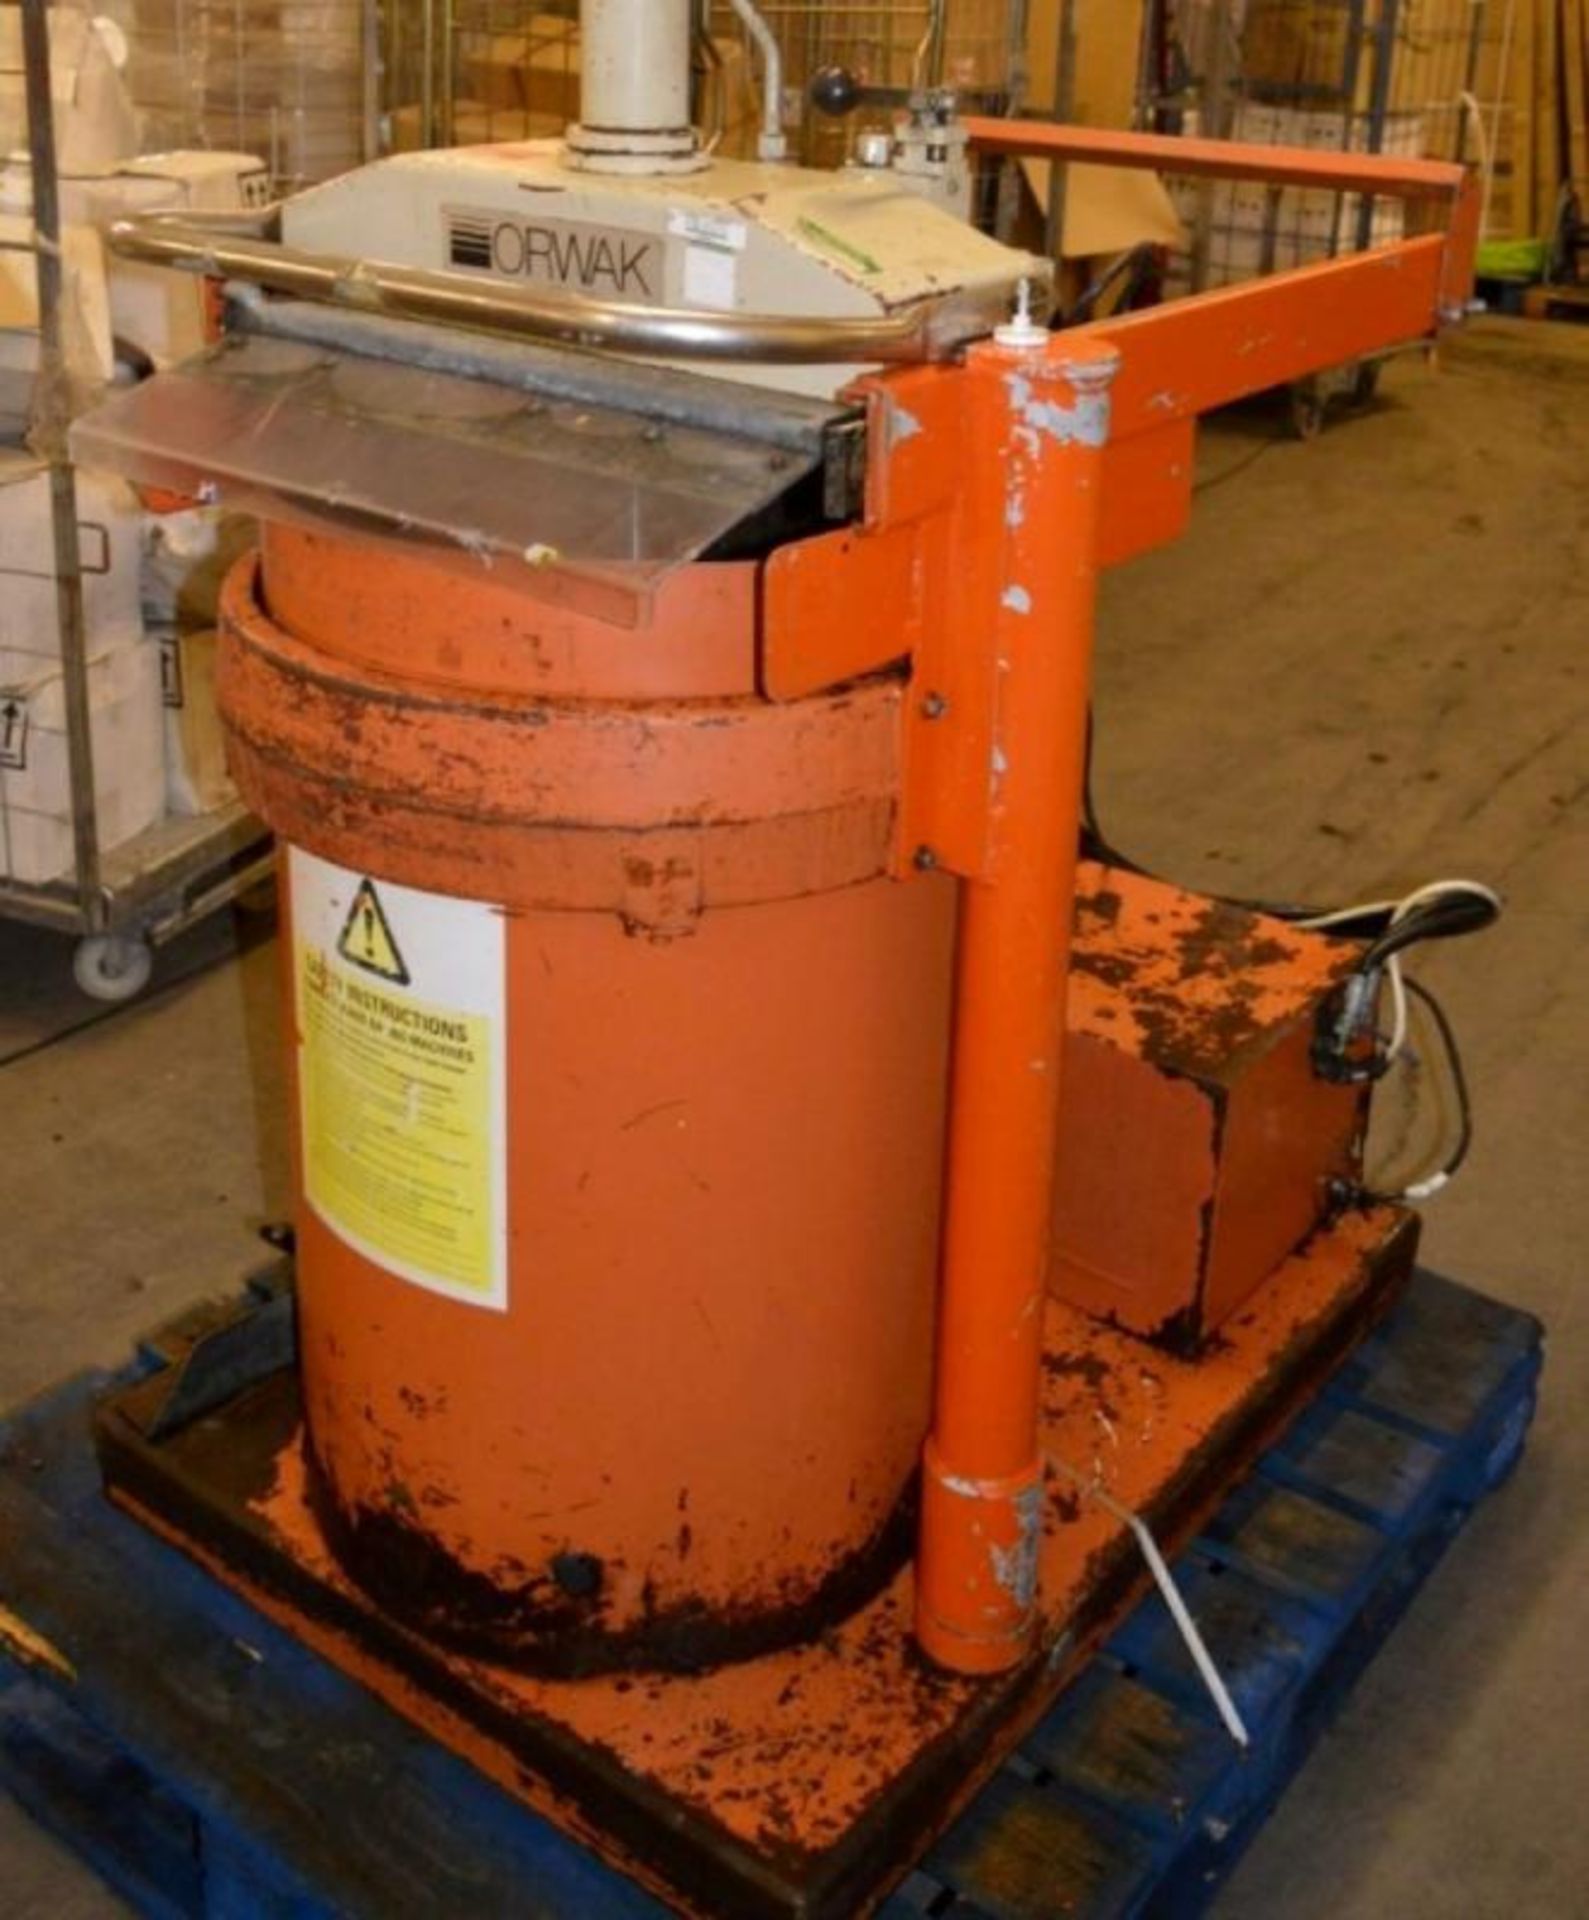 1 x Orwak 5030 Waste Compactor Bailer - Used For Compacting Recyclable or Non-Recyclable Waste - Red - Image 3 of 4